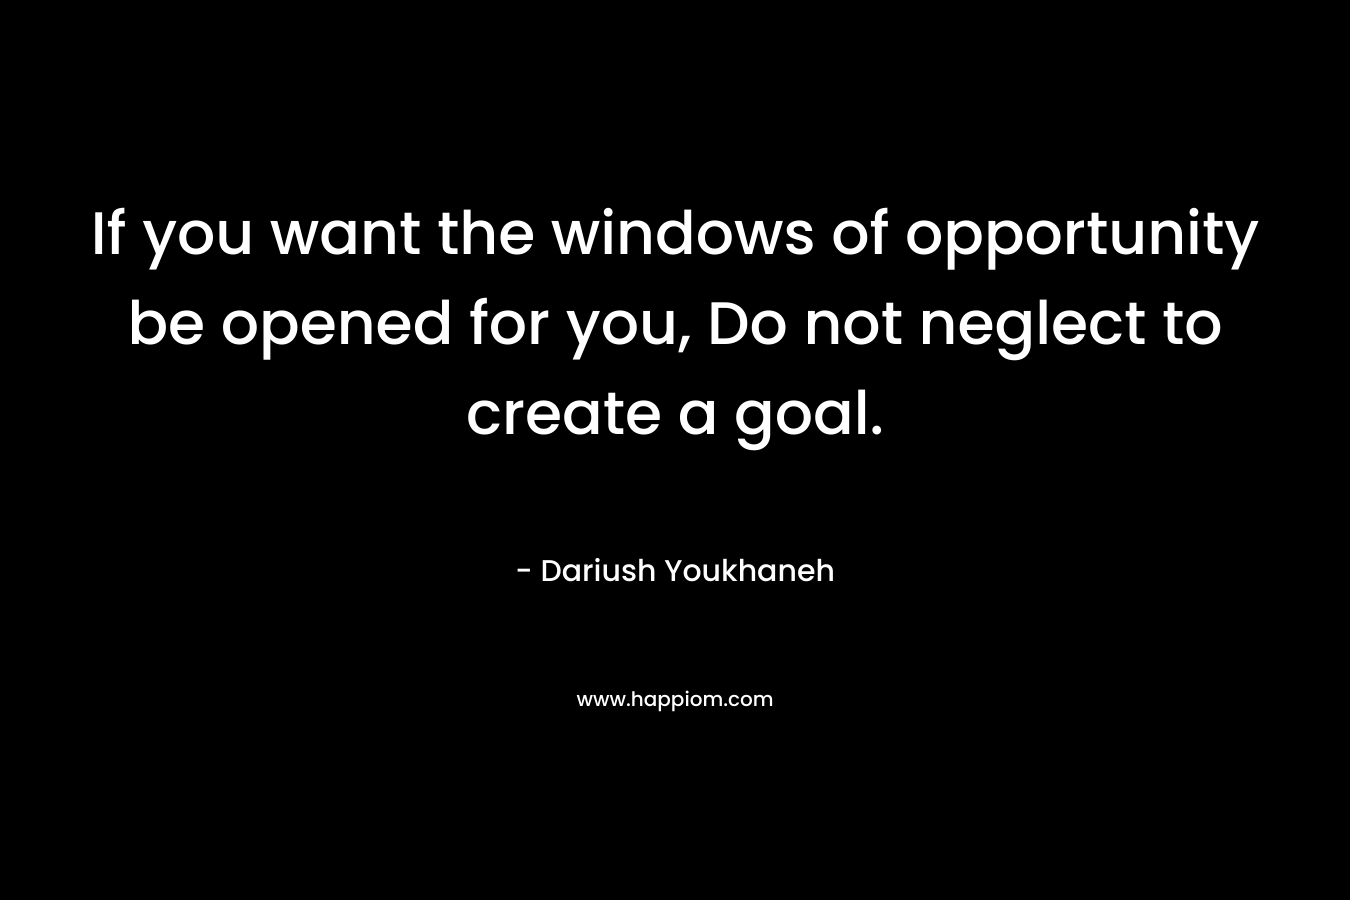 If you want the windows of opportunity be opened for you, Do not neglect to create a goal. – Dariush Youkhaneh